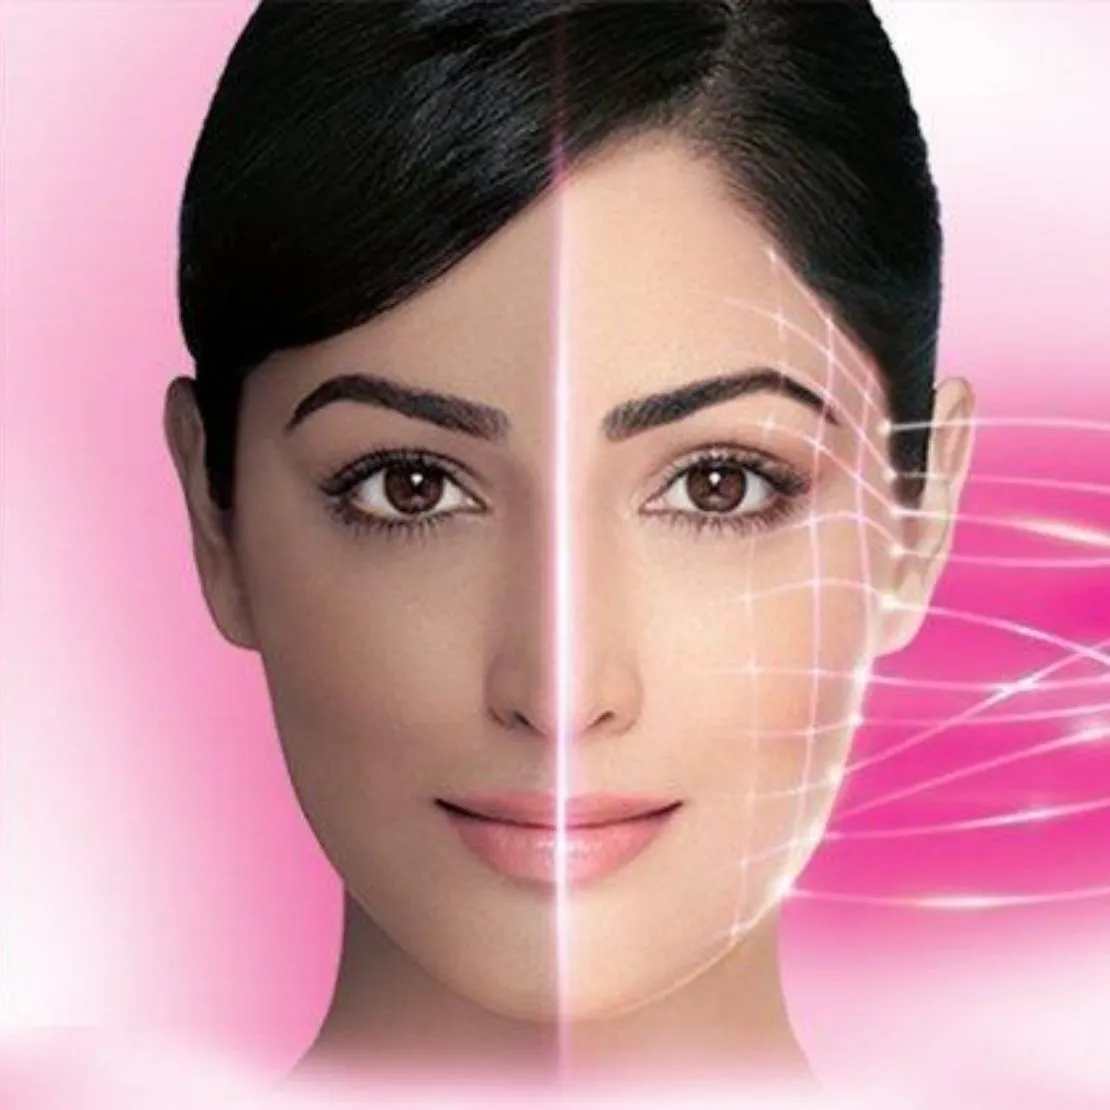 Snapshot of a skin-whitening ad by Fair & Lovely